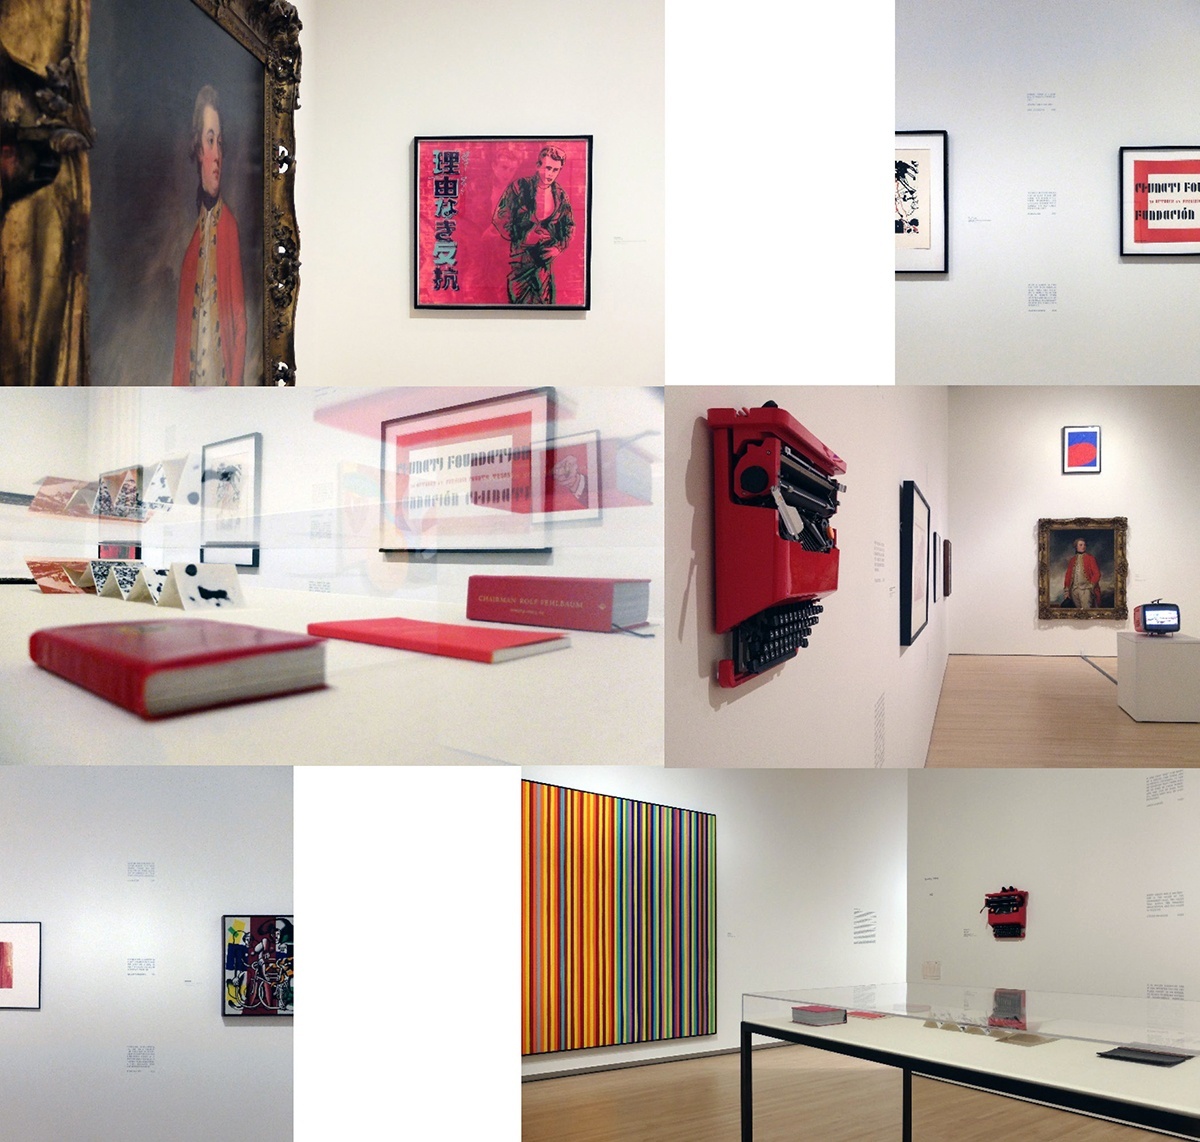 Series of photographs of pieces taken from the "Red" curated and designed exhibition